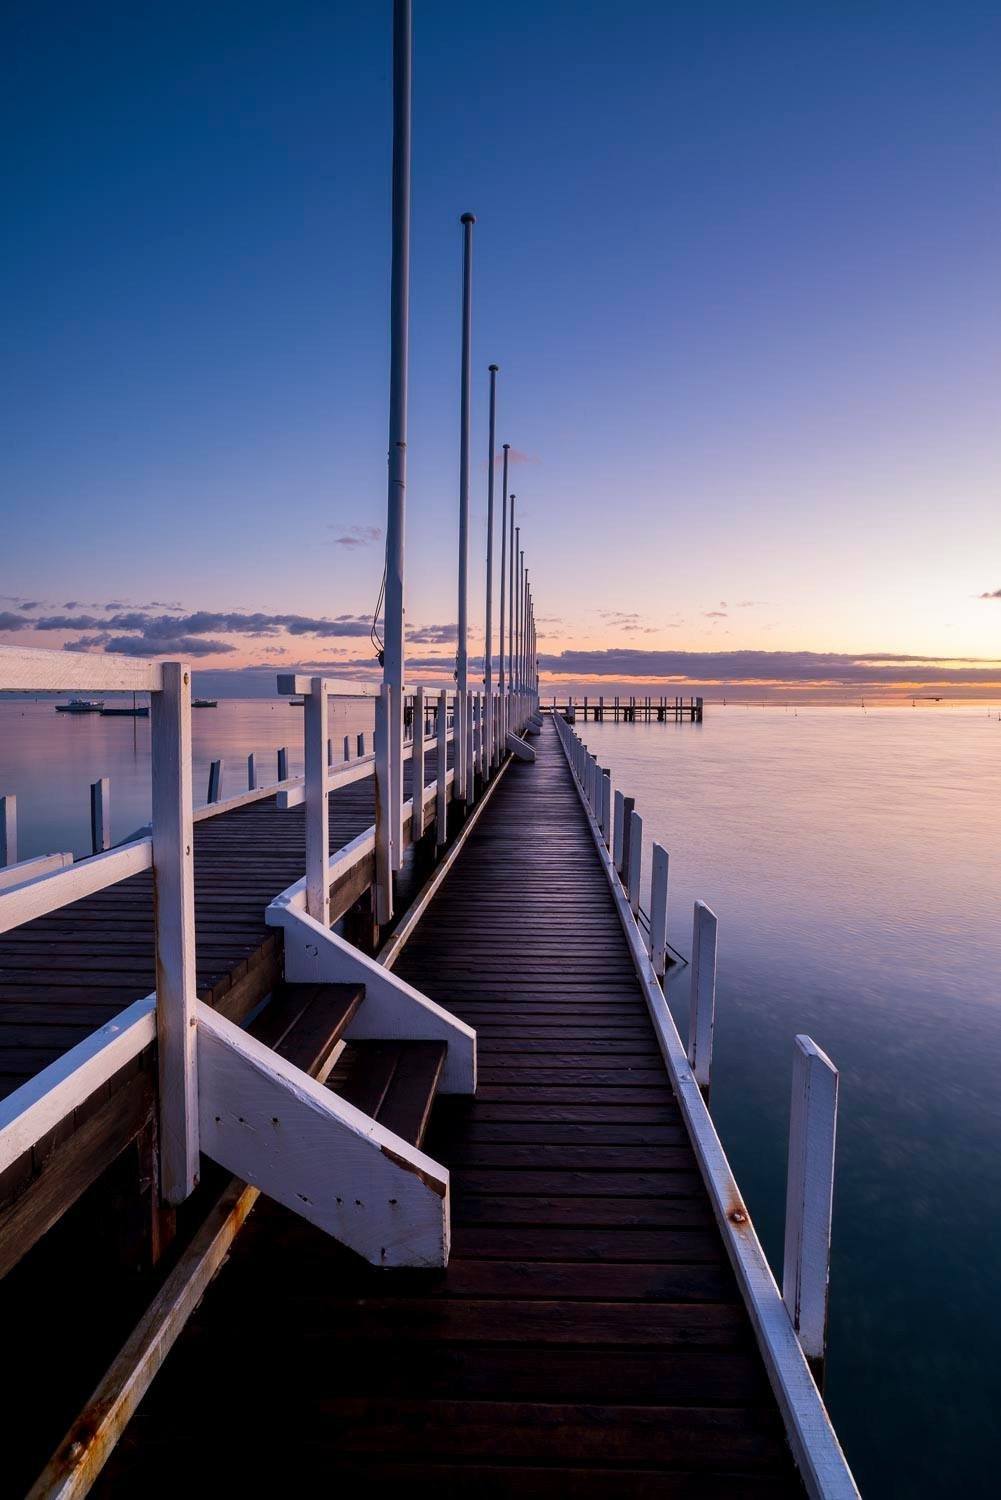 A well-constructed wooden track over the lake, Sorrento Yacht Club Jetty - Mornington Peninsula VIC